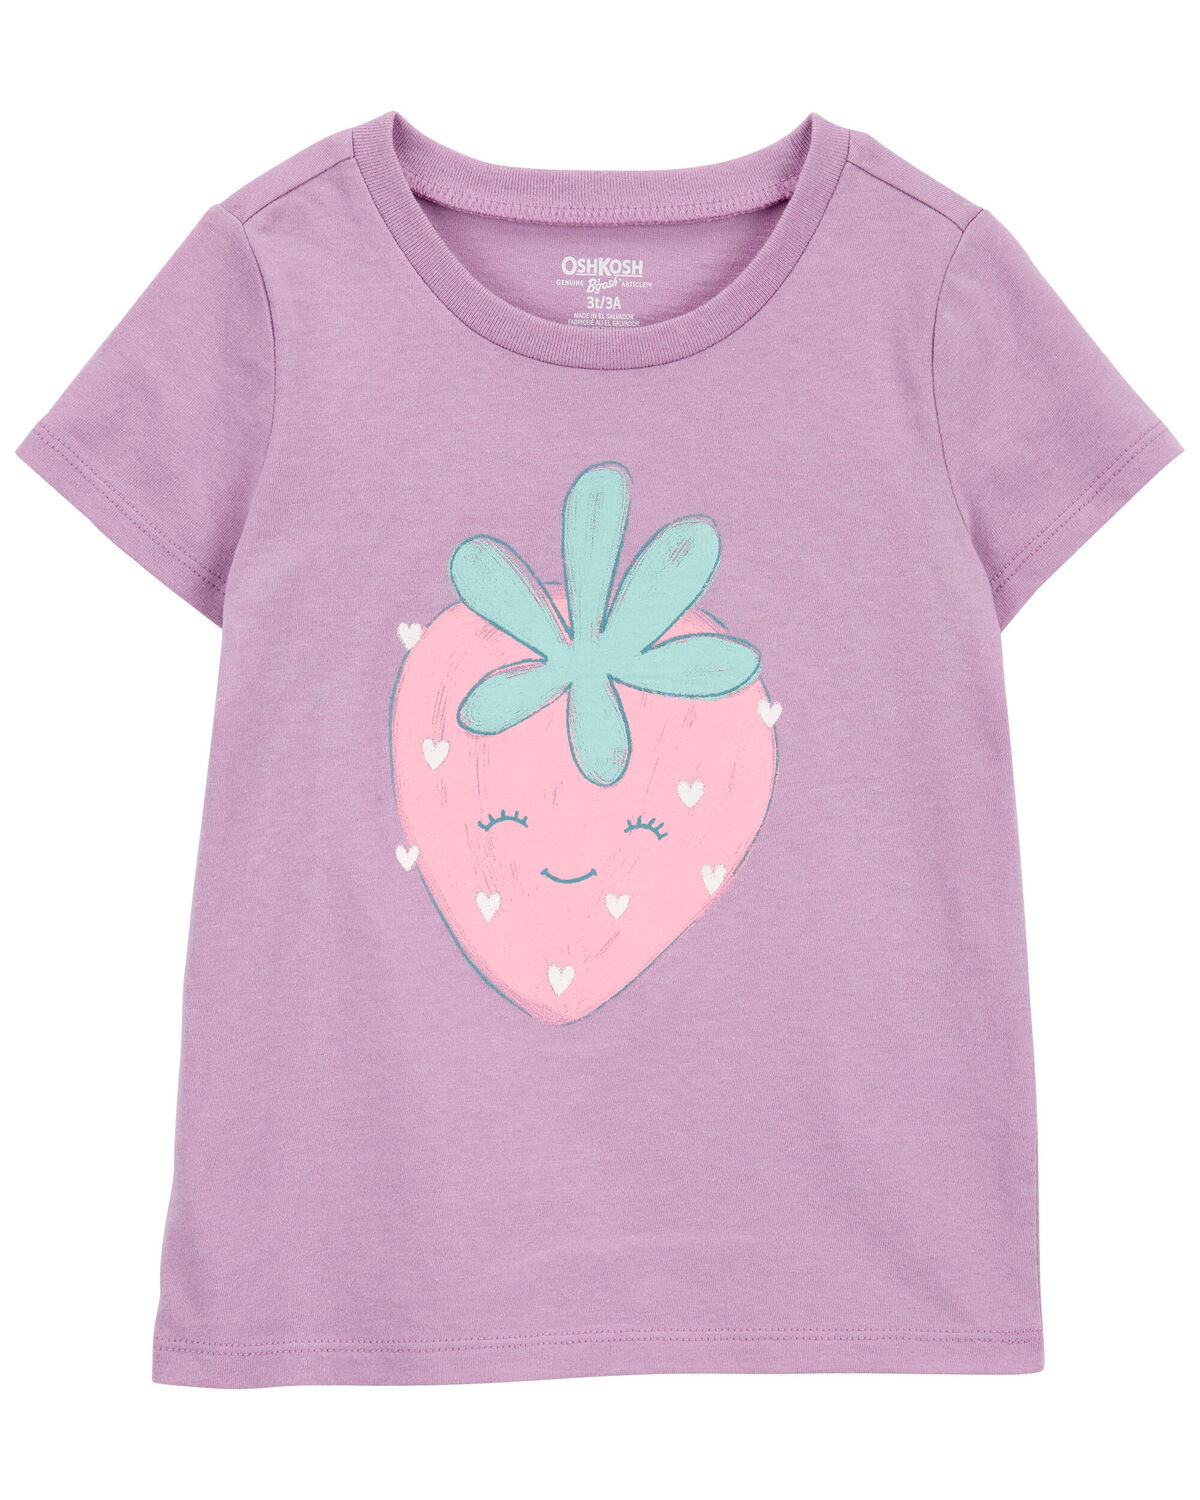 Toddler Strawberry Graphic Tee